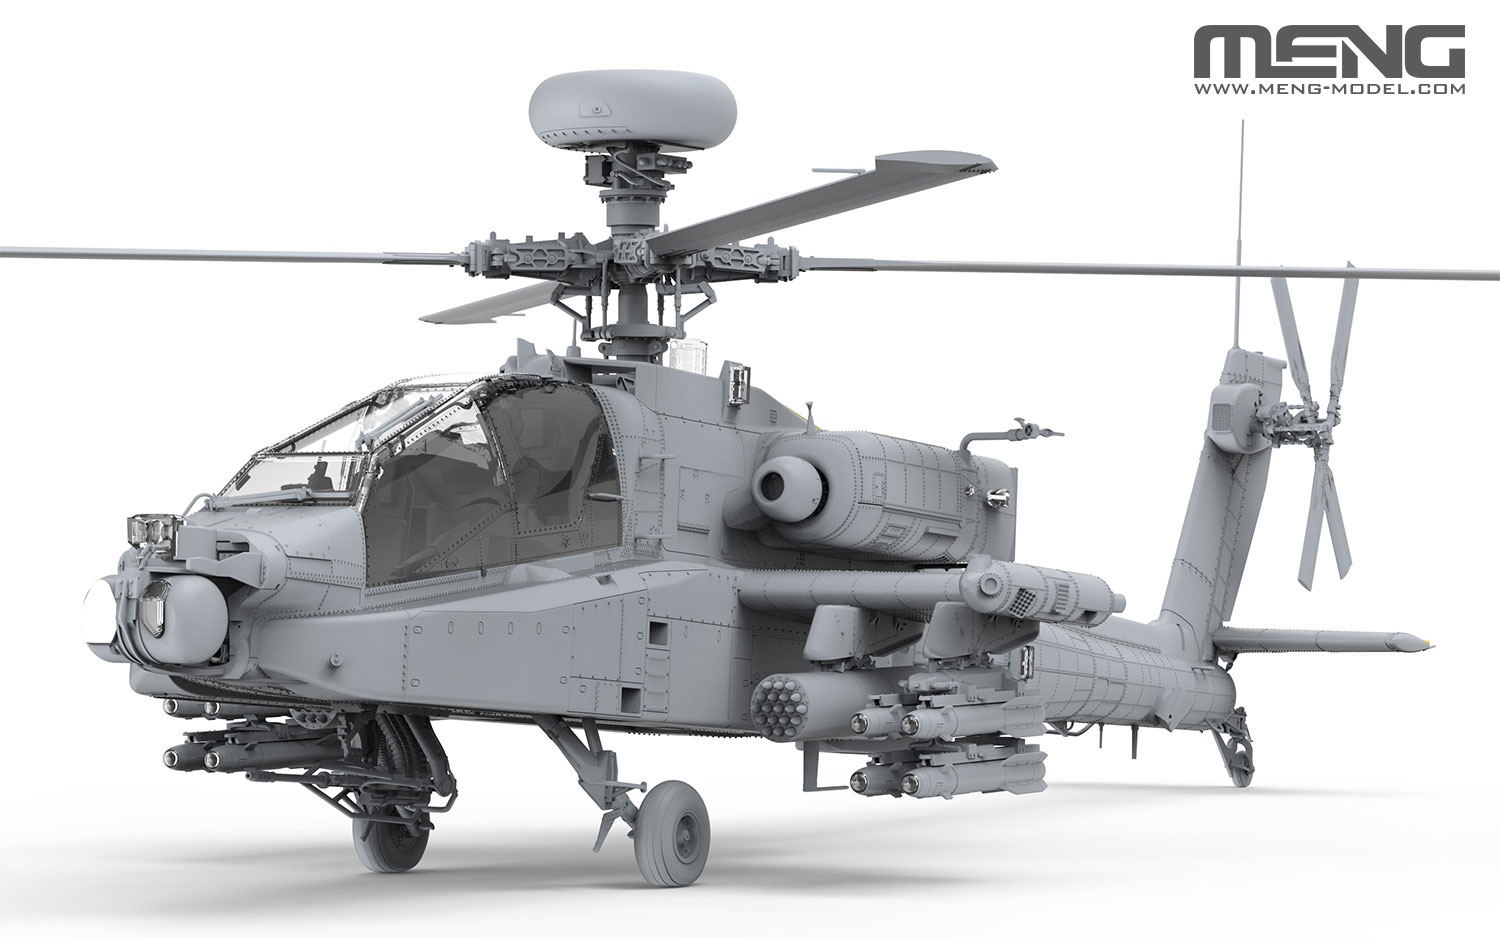 1/35 Boeing AH-64D Apache Longbow Heavy Attack Helicopter - Click Image to Close